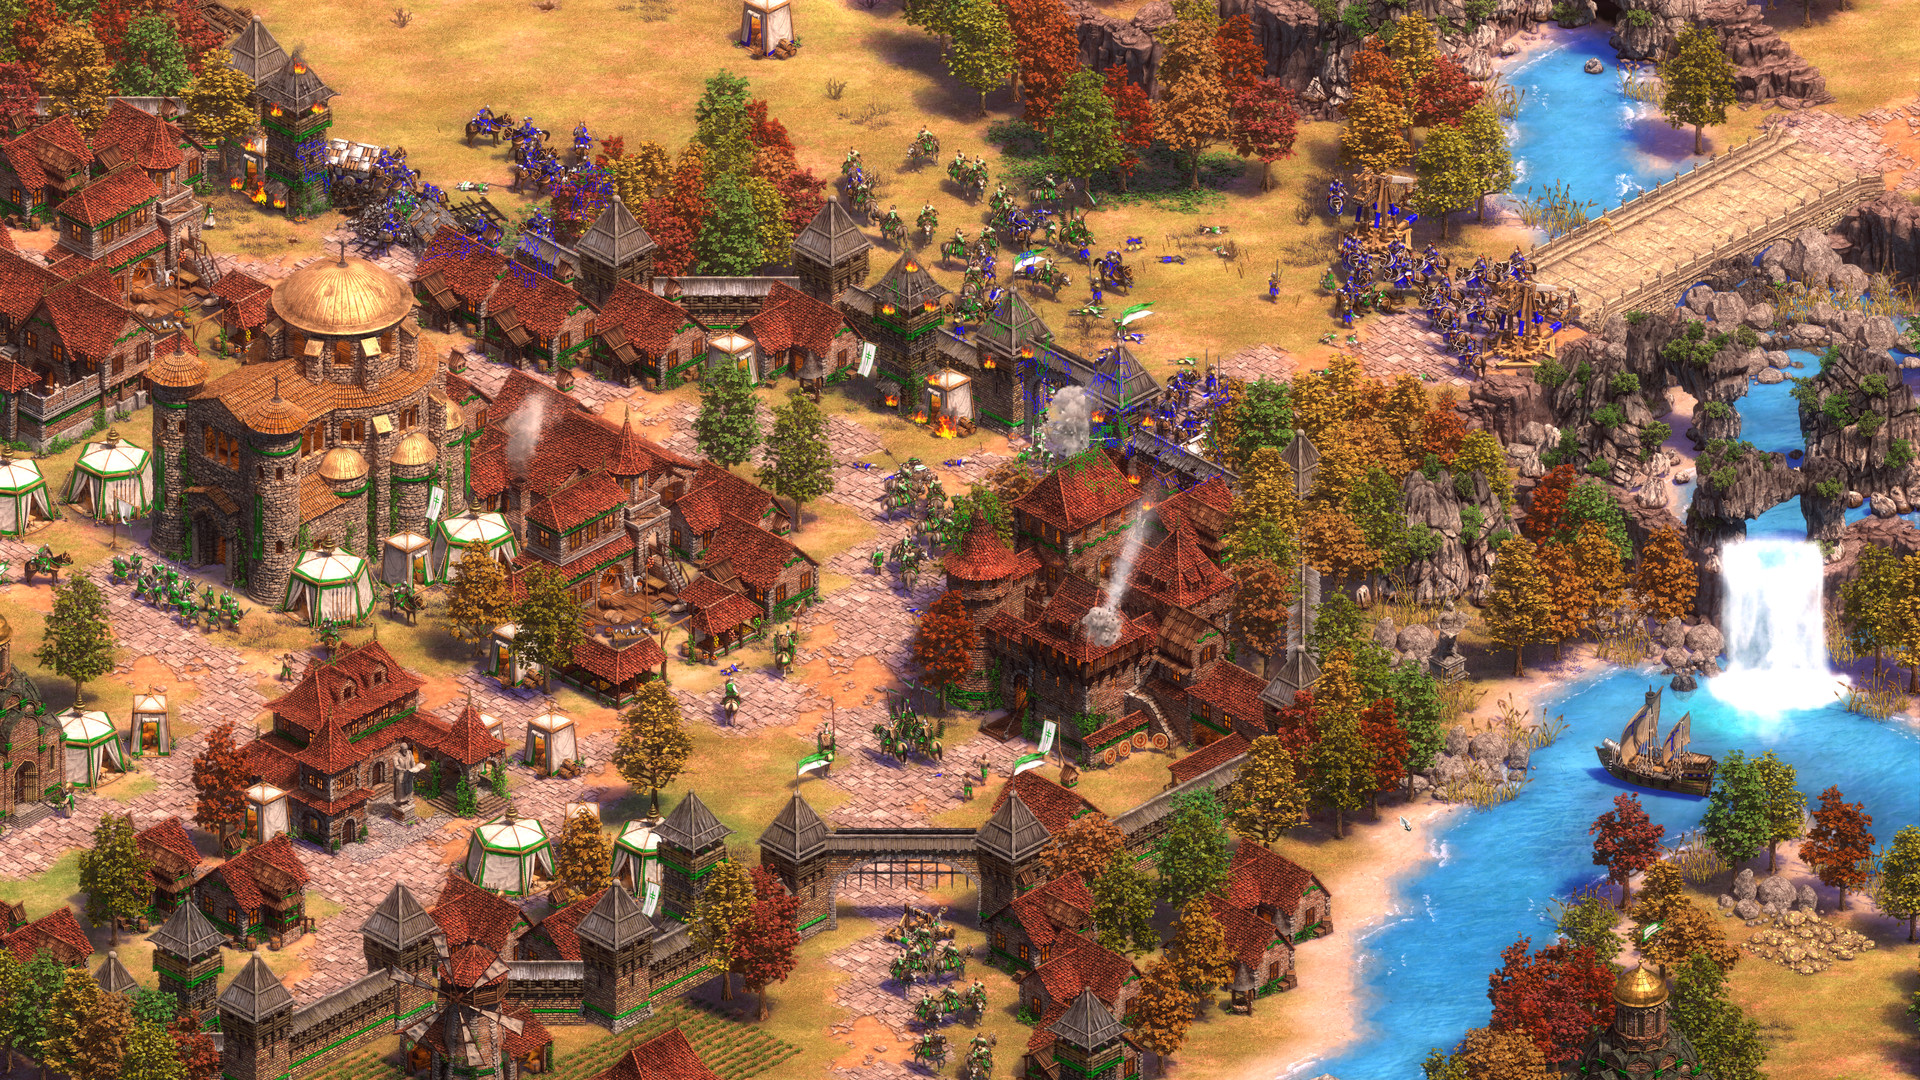 Age of Empires II: Definitive Edition Screenshot 1